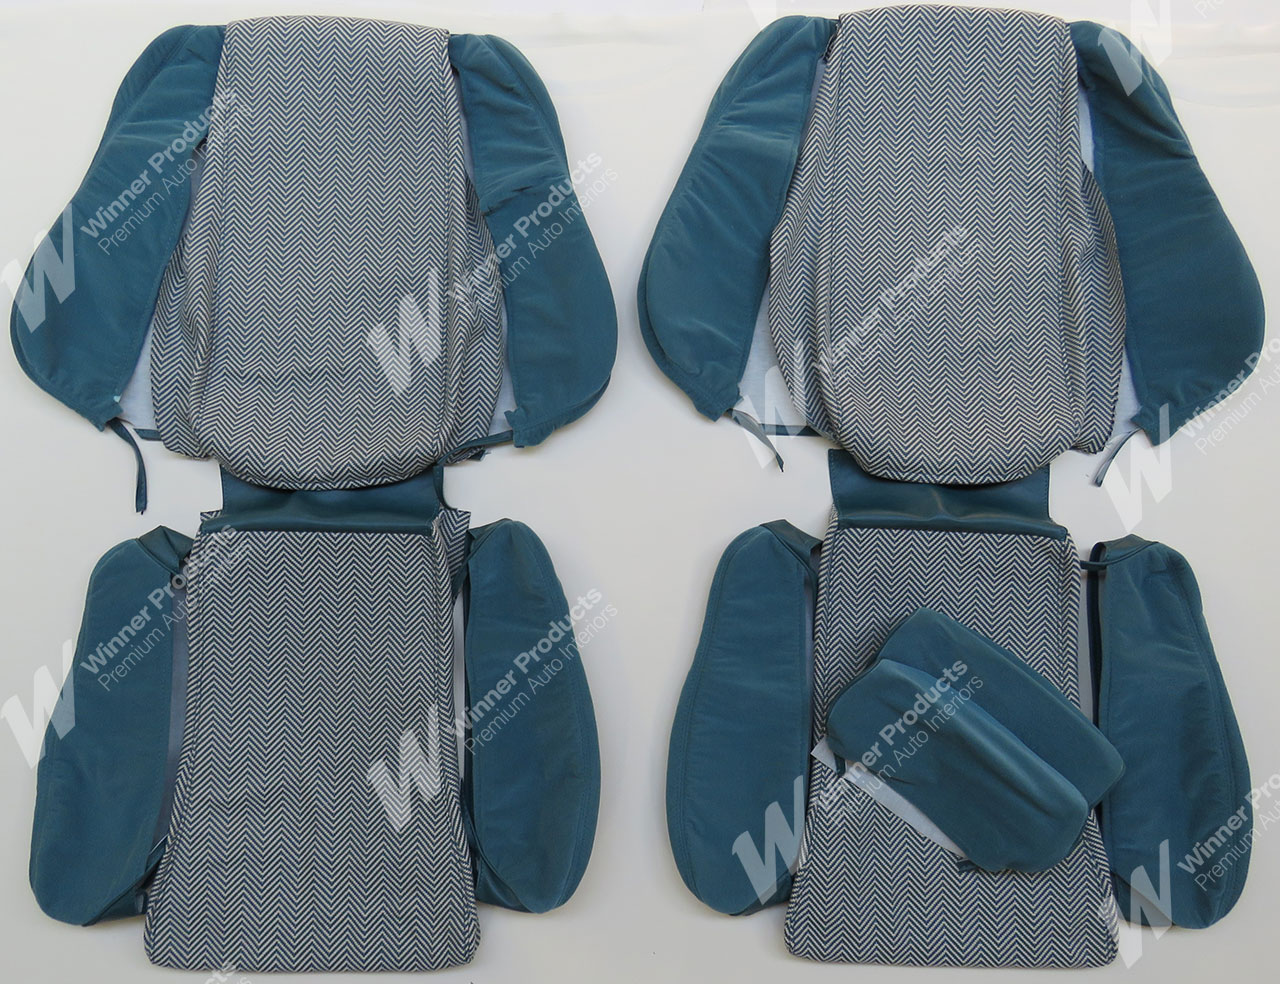 Holden Commodore VK SS Sedan 23X Cerulean Seat Covers (Image 1 of 6)